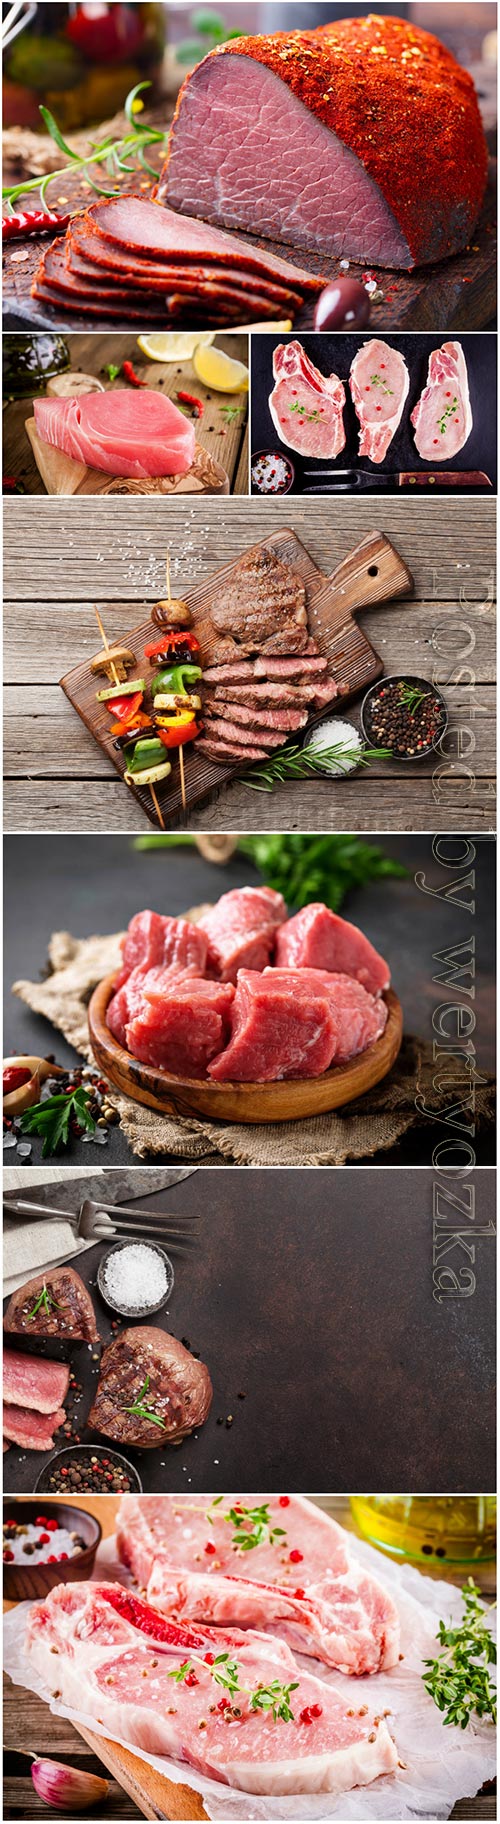 Fresh raw meat, grilled vegetables and beef steak stock photo